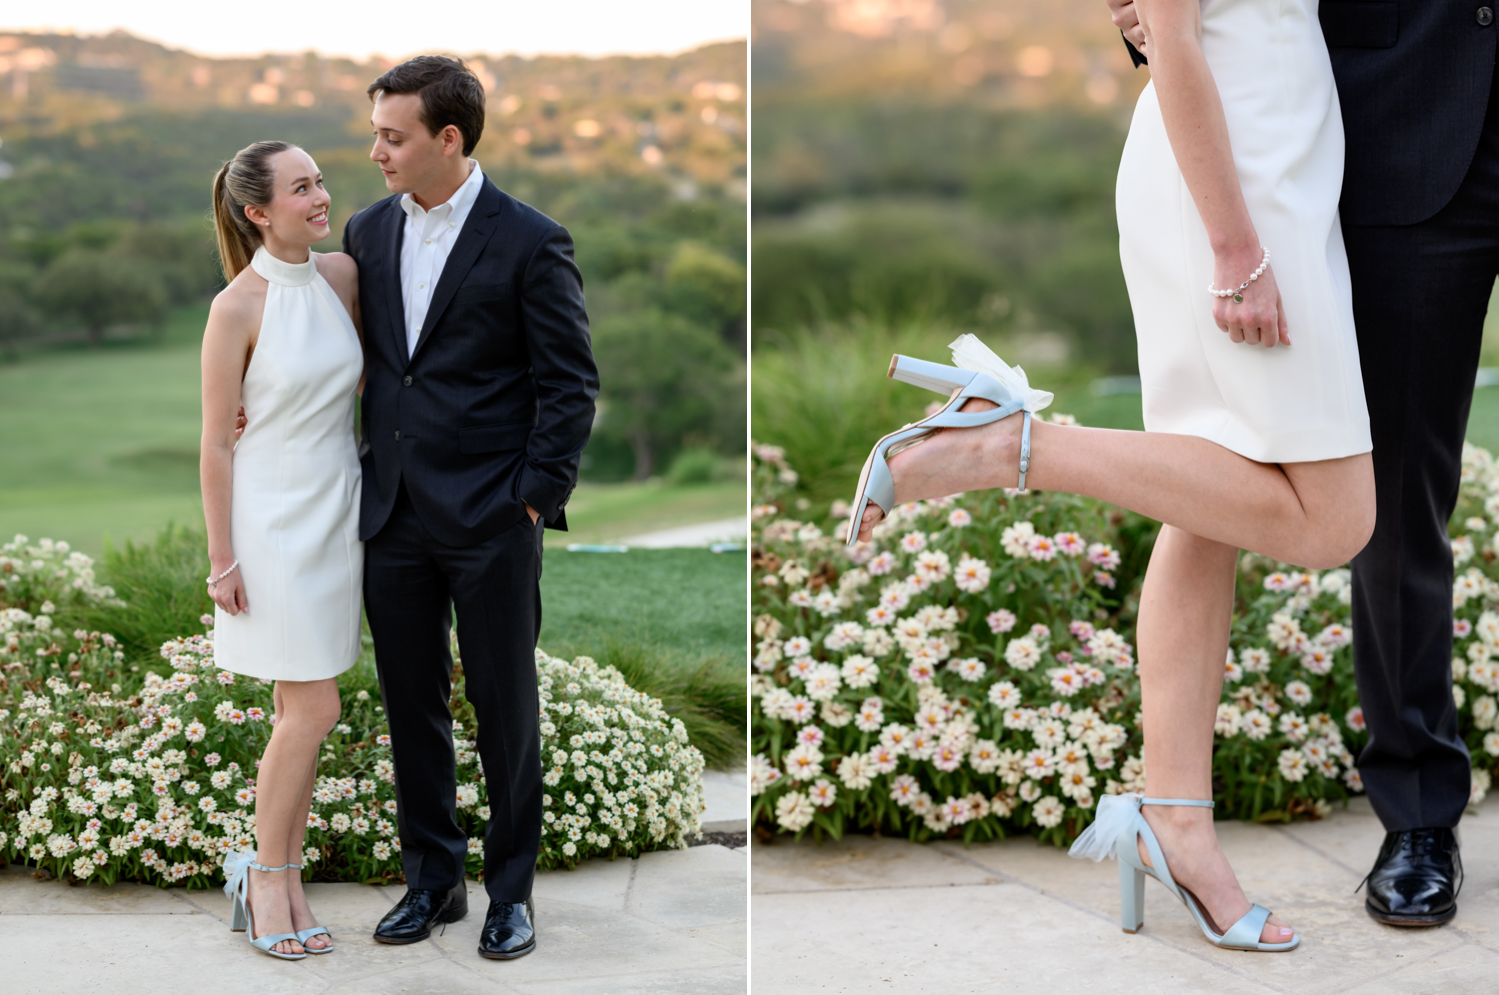 Left: Bride and groom look at each other outside before their rehearsal dinner. Right: A close up of the bride's baby blue heels with a tulle bow on the back.